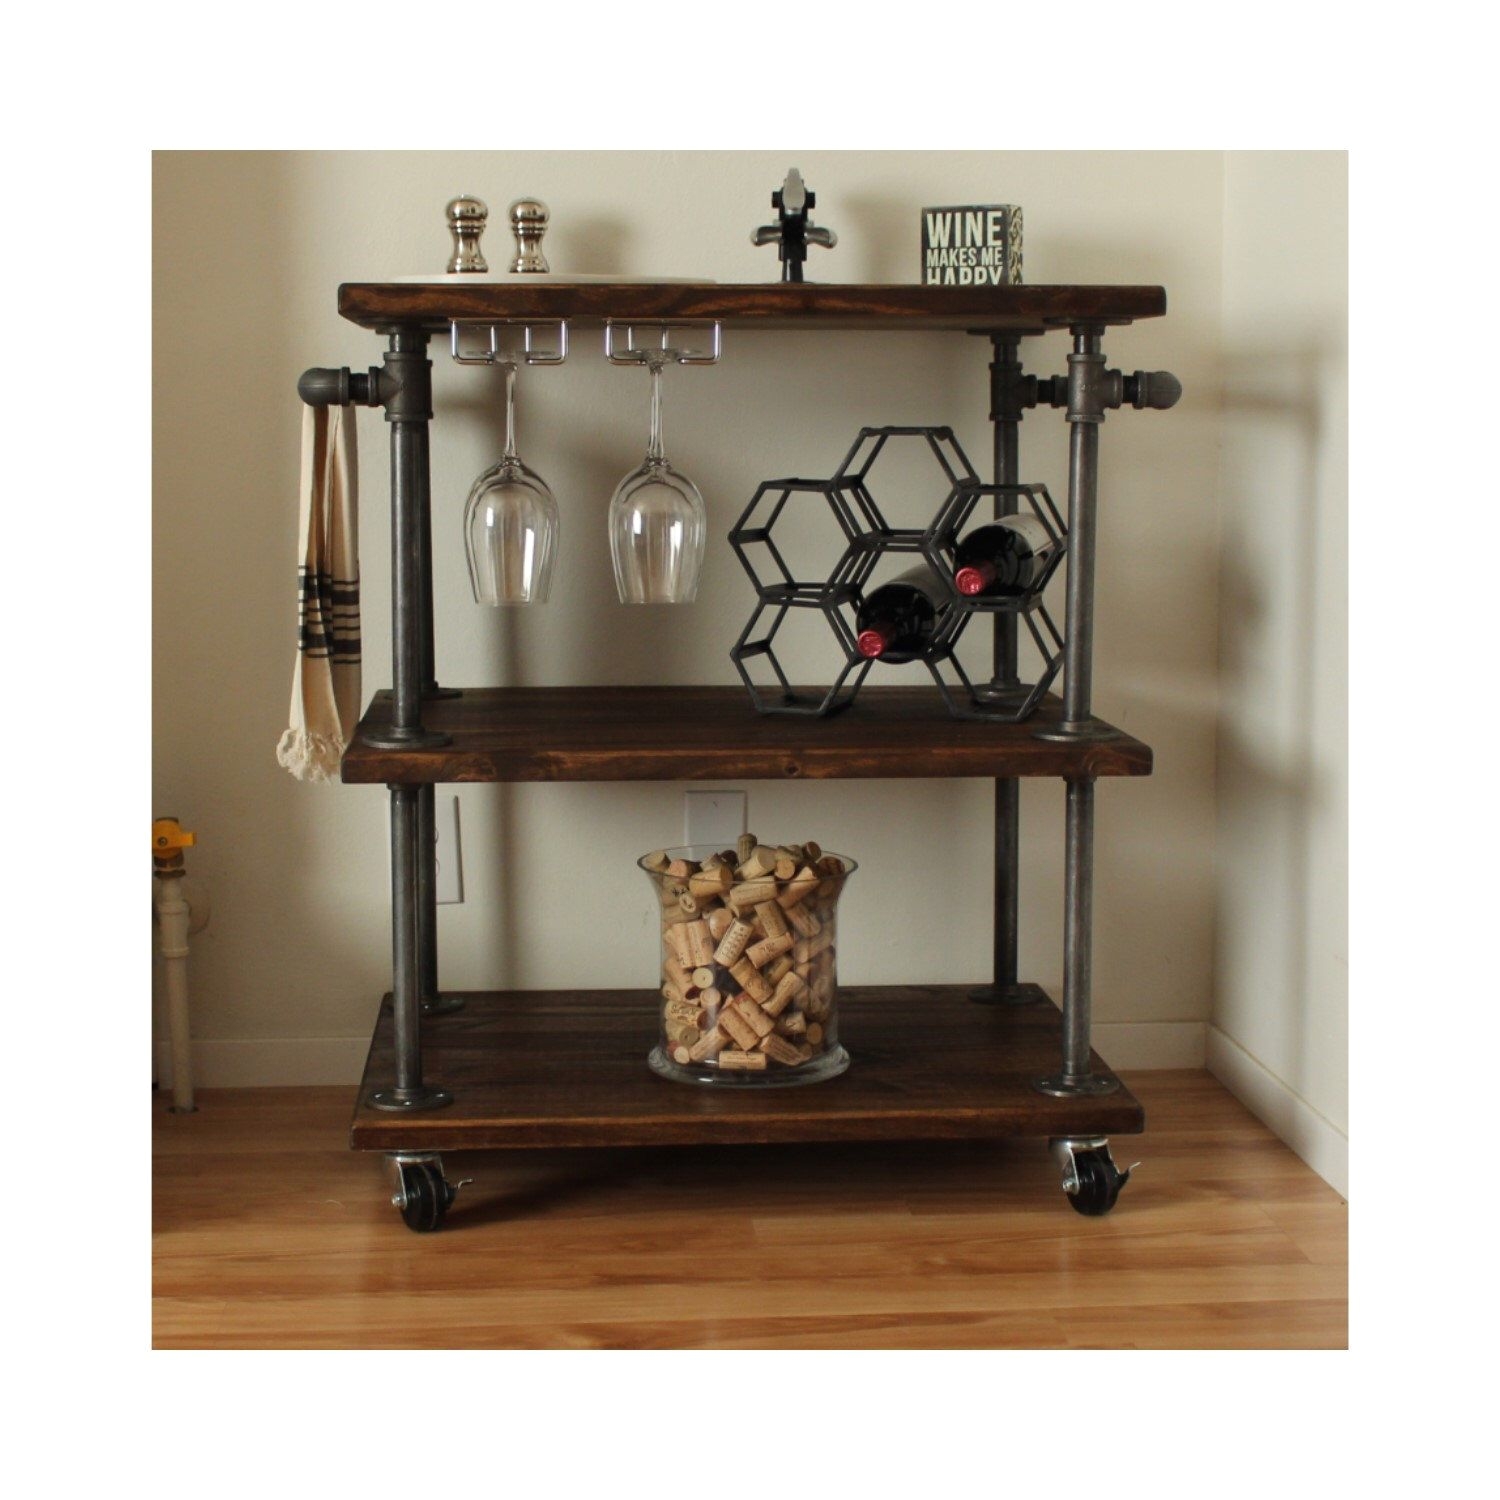 industrial bar cart 3 tiered kitchen cart pipe bar cart wine cart kitchen island wine display by maverickindustrial on etsy